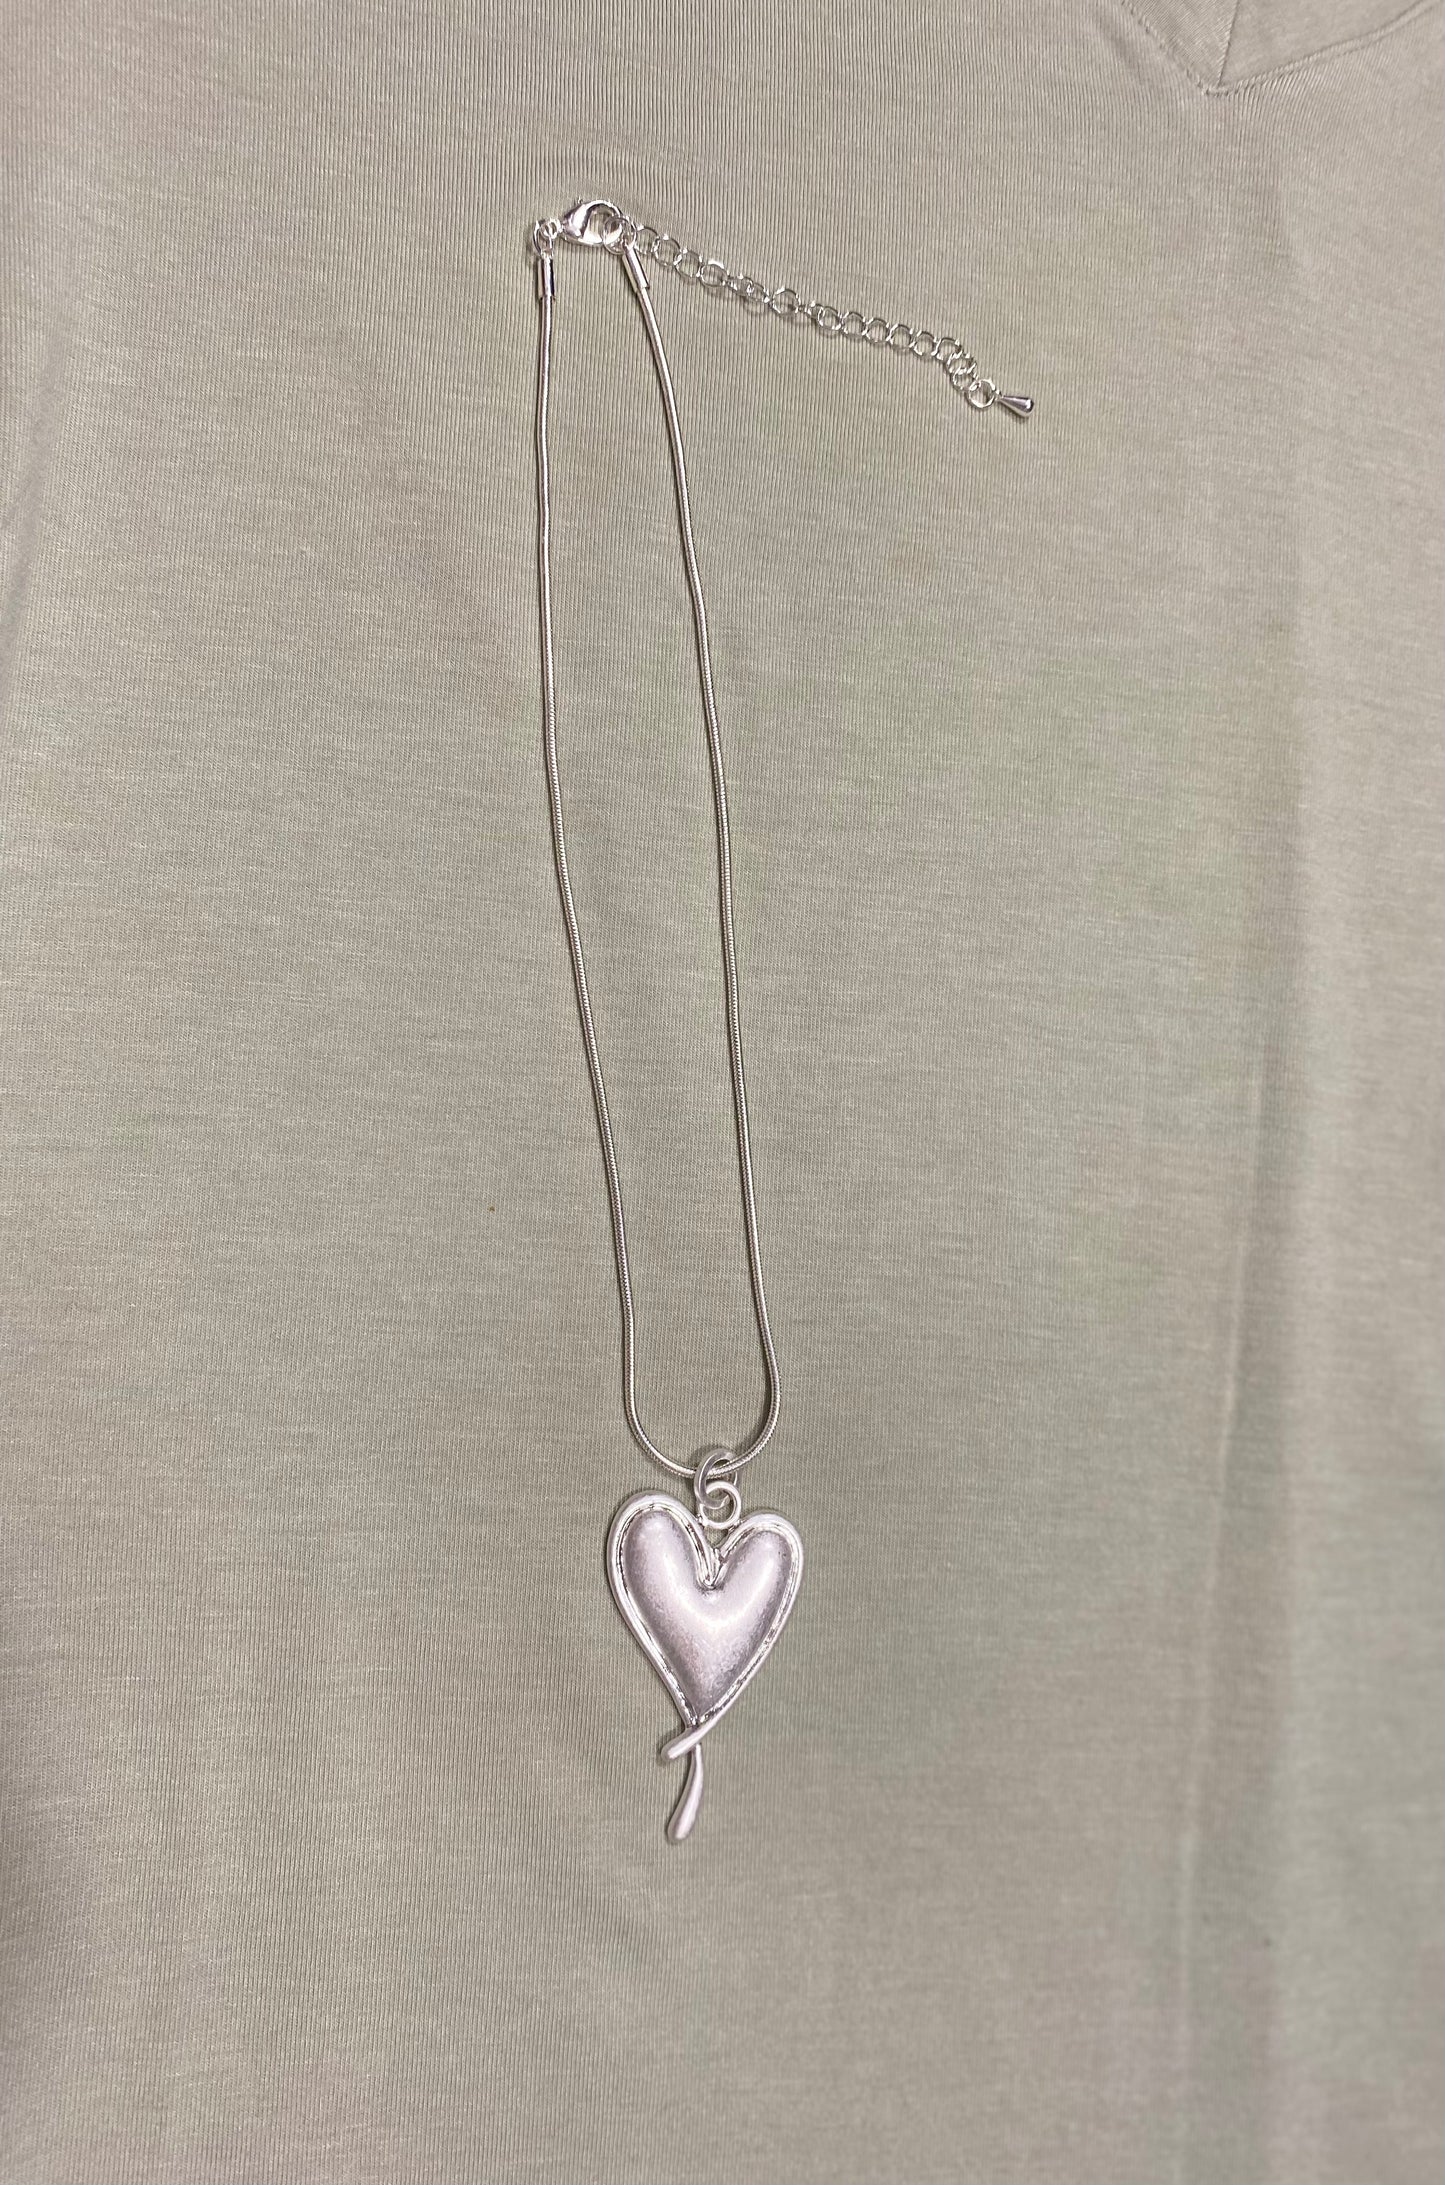 Miss Sterling Heart Necklace